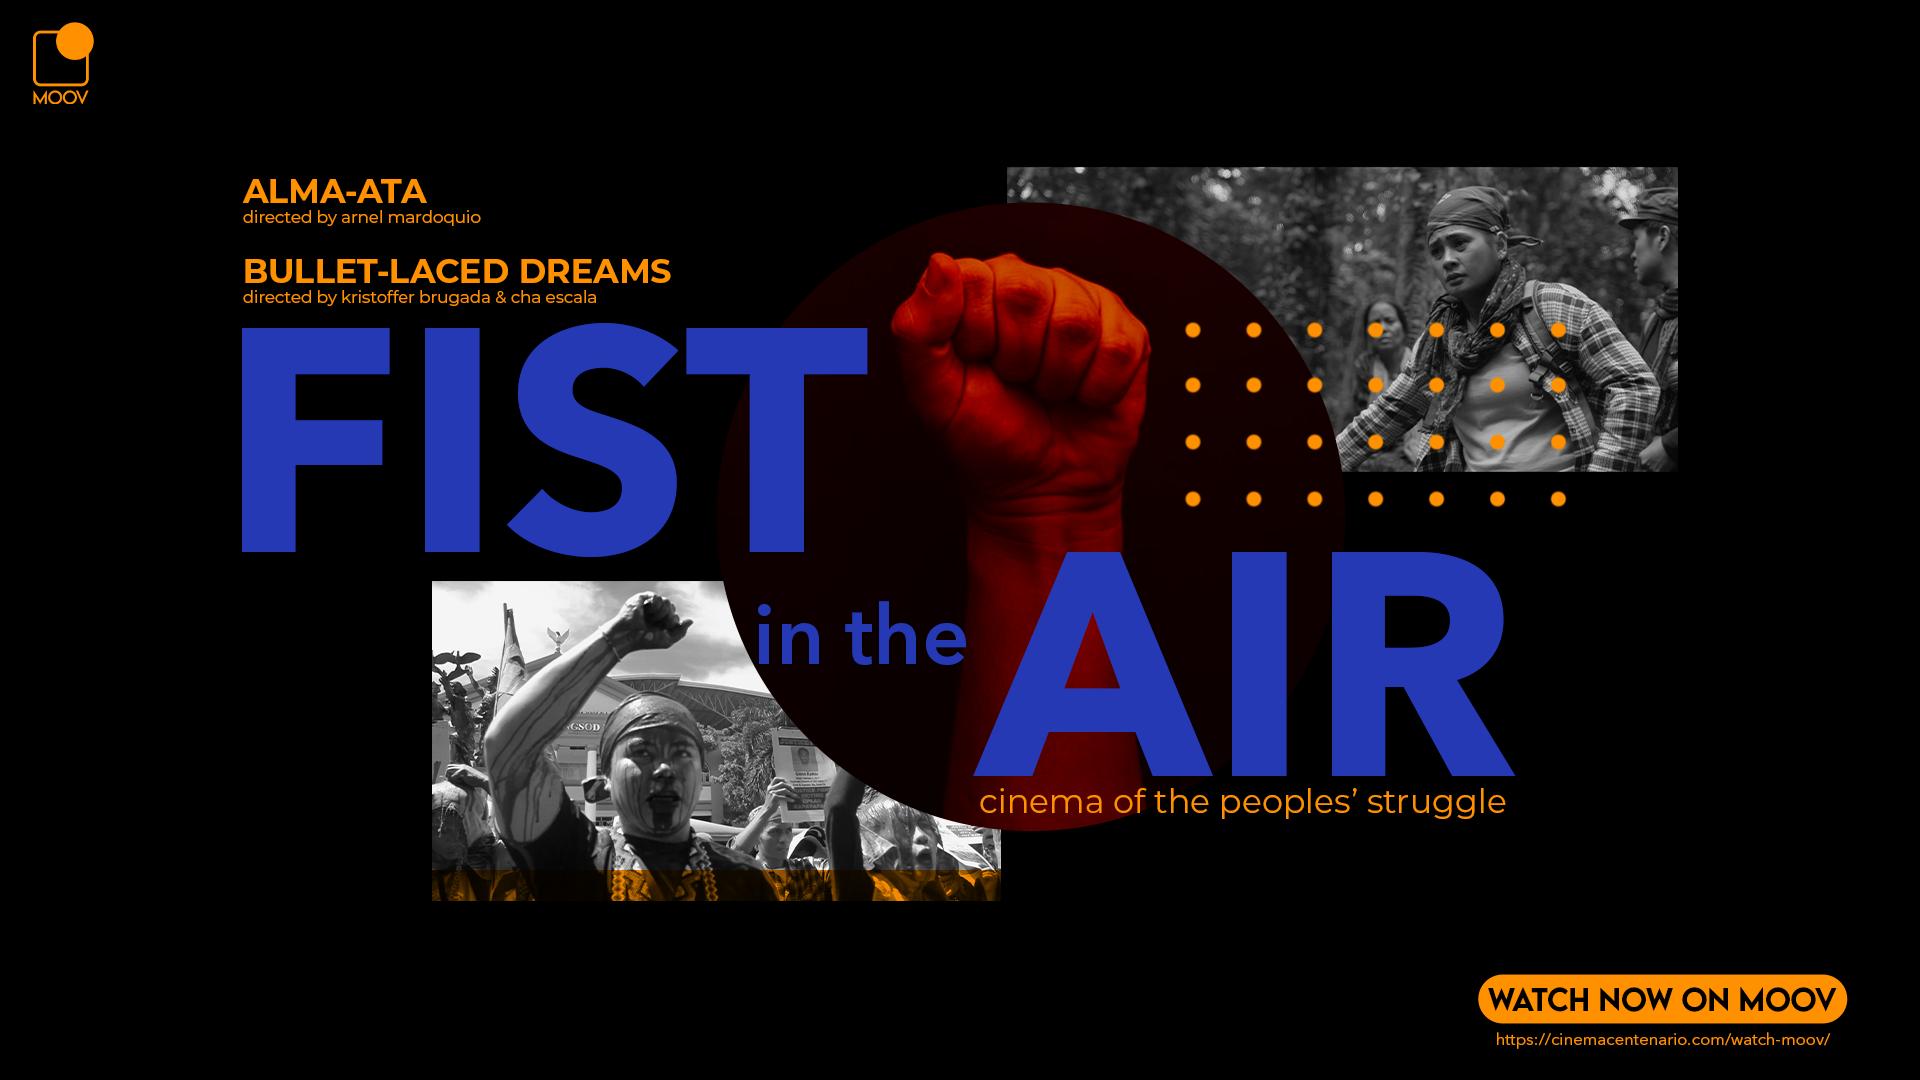 Fist in the Air: Cinema of the Peoples' Struggle